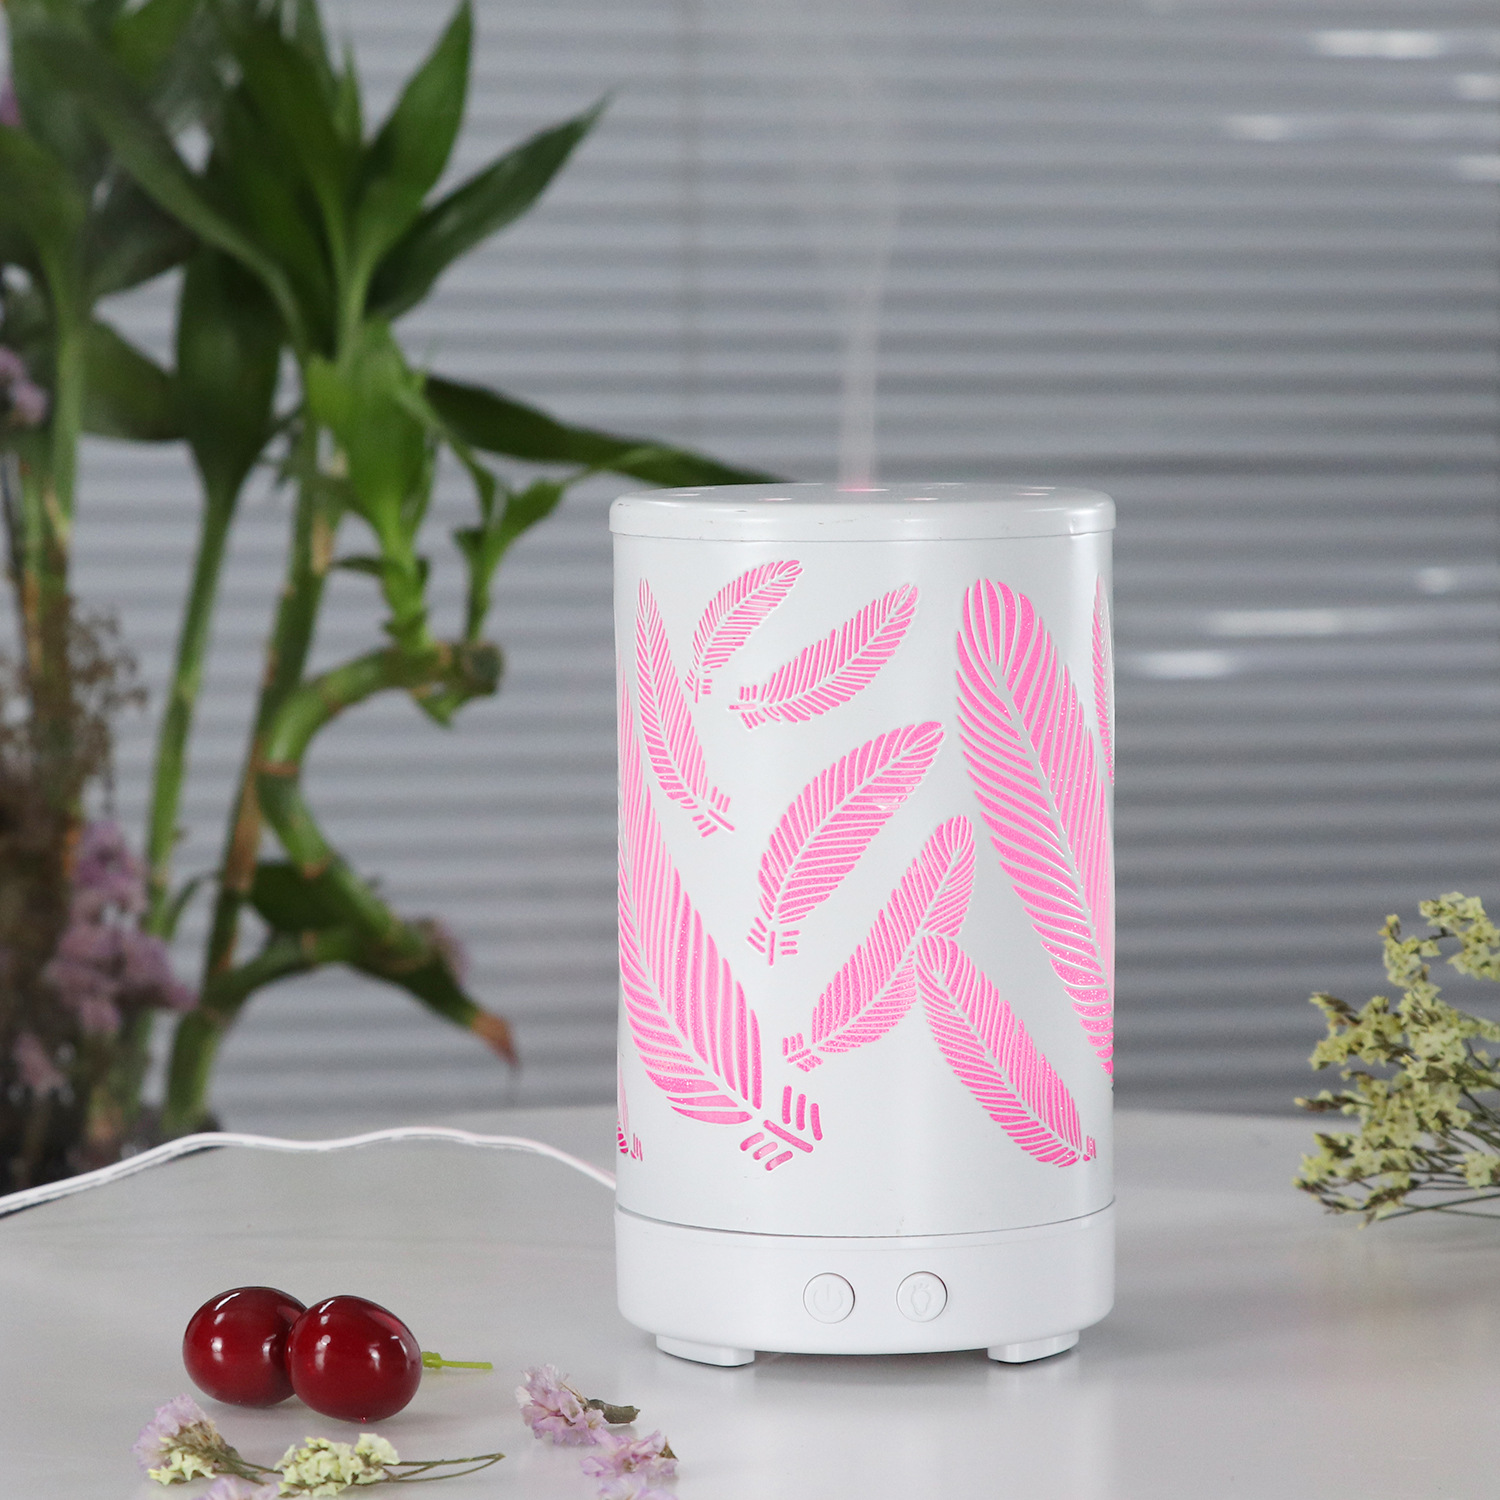 100ml Iron Shell Butterfly Timing LED Ultrasonic Aroma Diffuser Humidifier